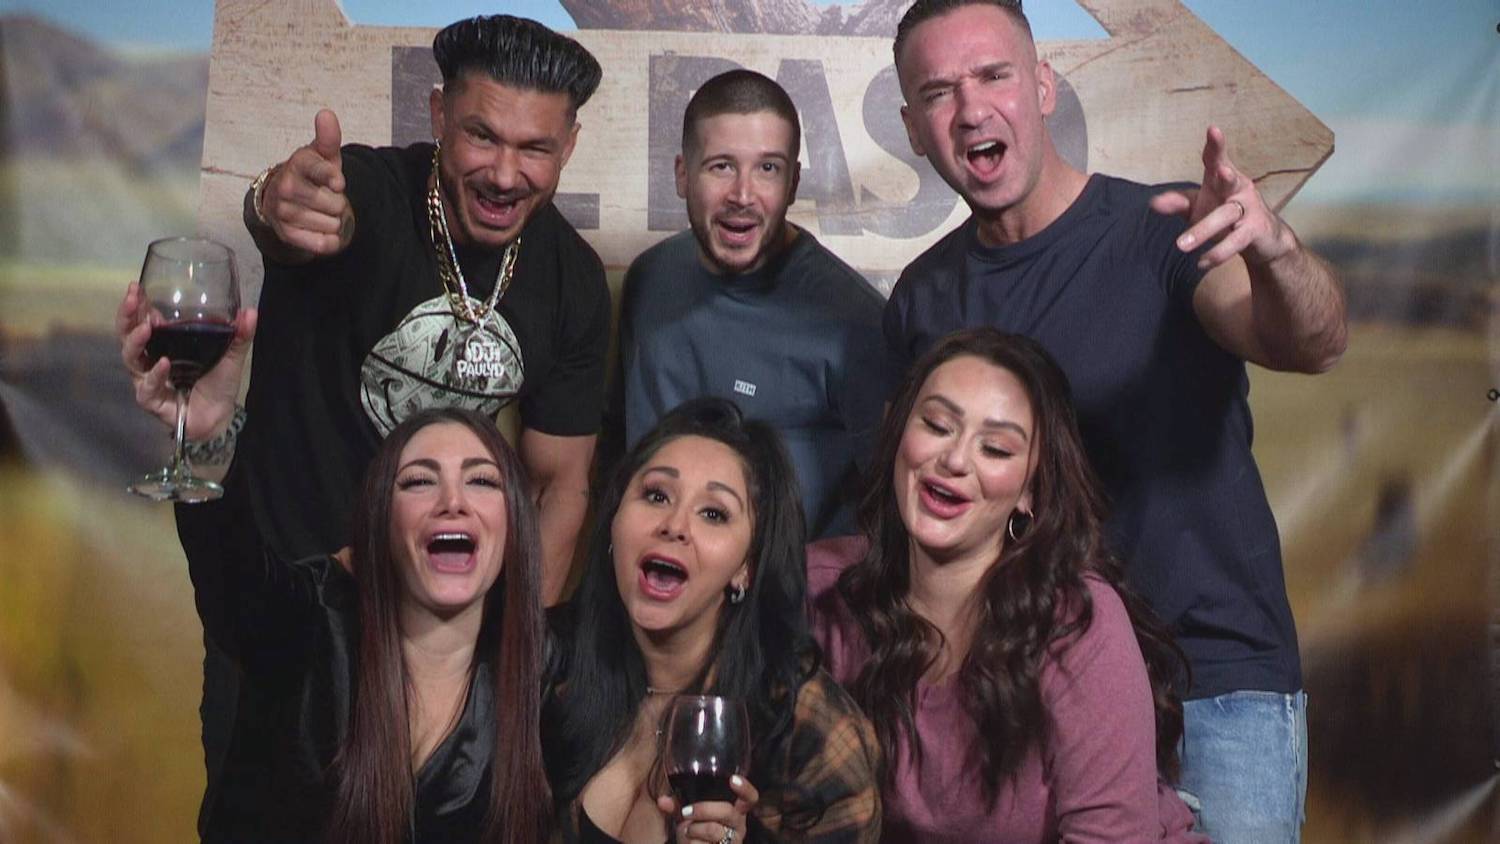 'Jersey Shore: Family Vacation' cast in El Paso, Texas, with the exception of Angelina Pivarnick